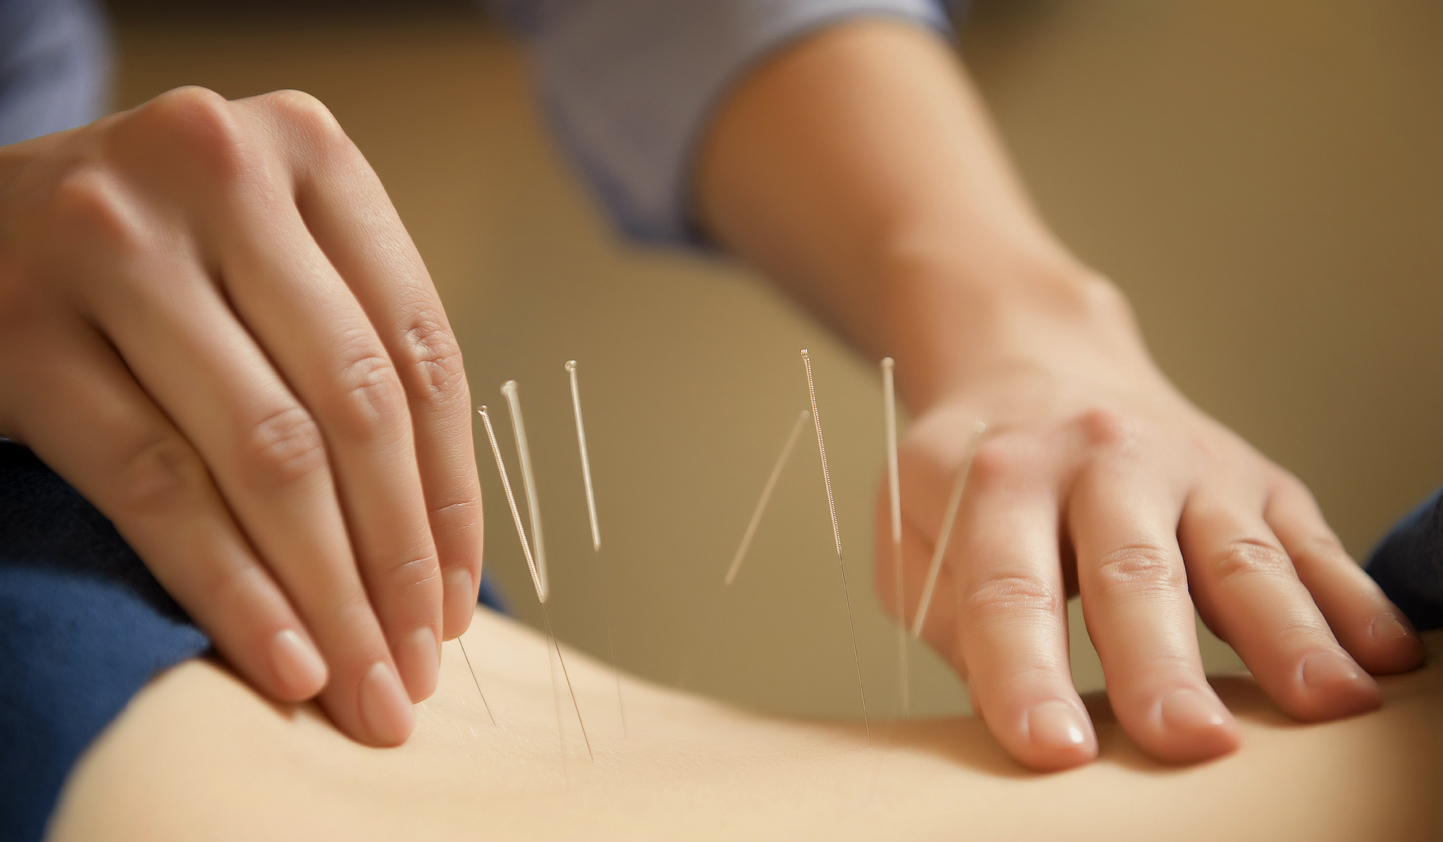 Acupuncture for Back Pain - What you Need to Know - Neotech Care